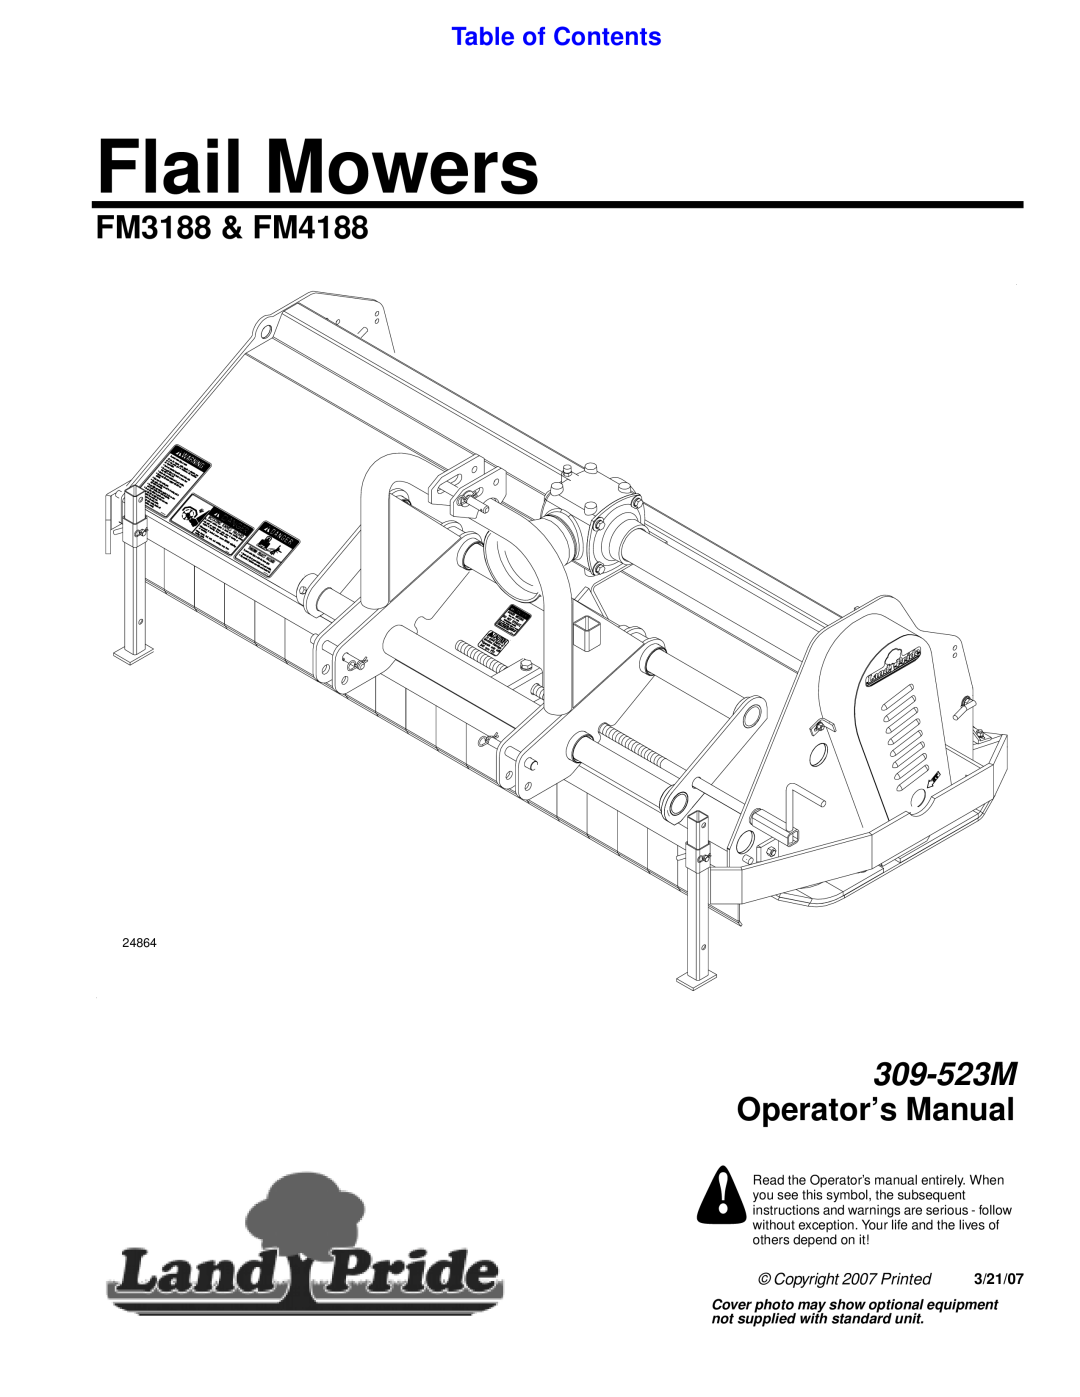 Land Pride manual Table of Contents, Flail Mowers, FM3188 & FM4188, 309-523M Operator’s Manual, Copyright 2007 Pr inted 